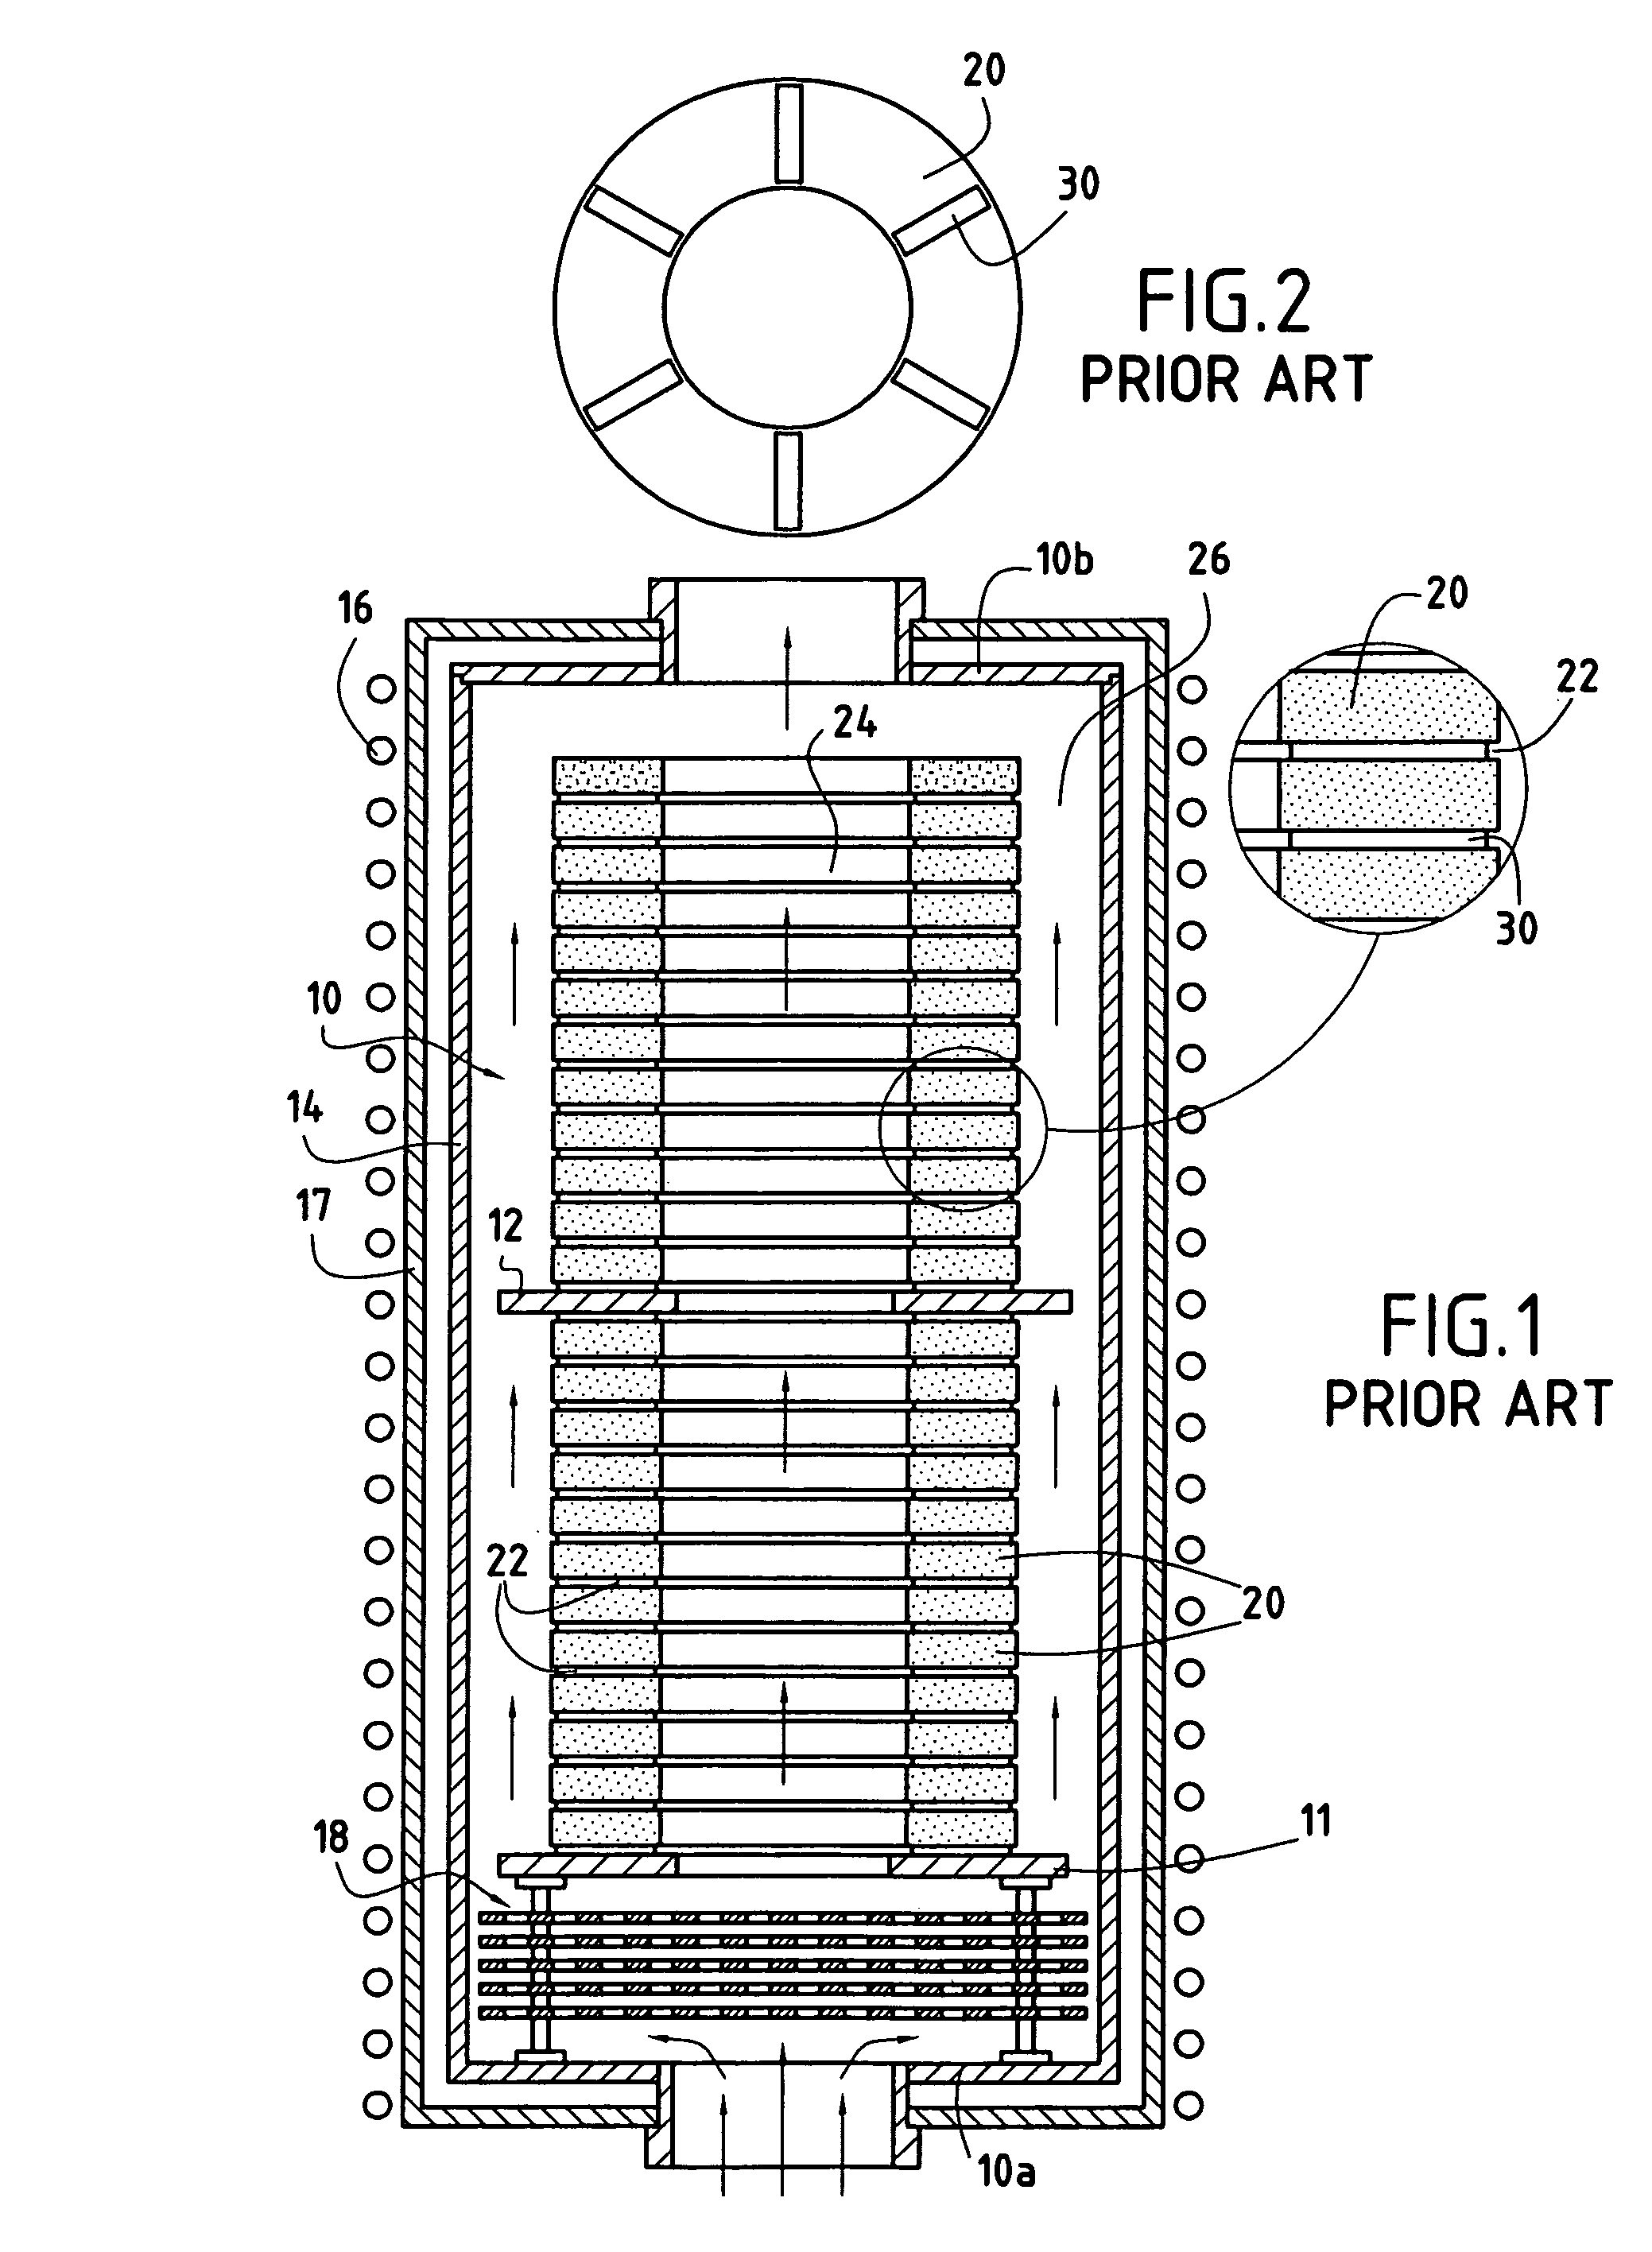 Chemical vapor infiltration method for densifying porous substrates having a central passage